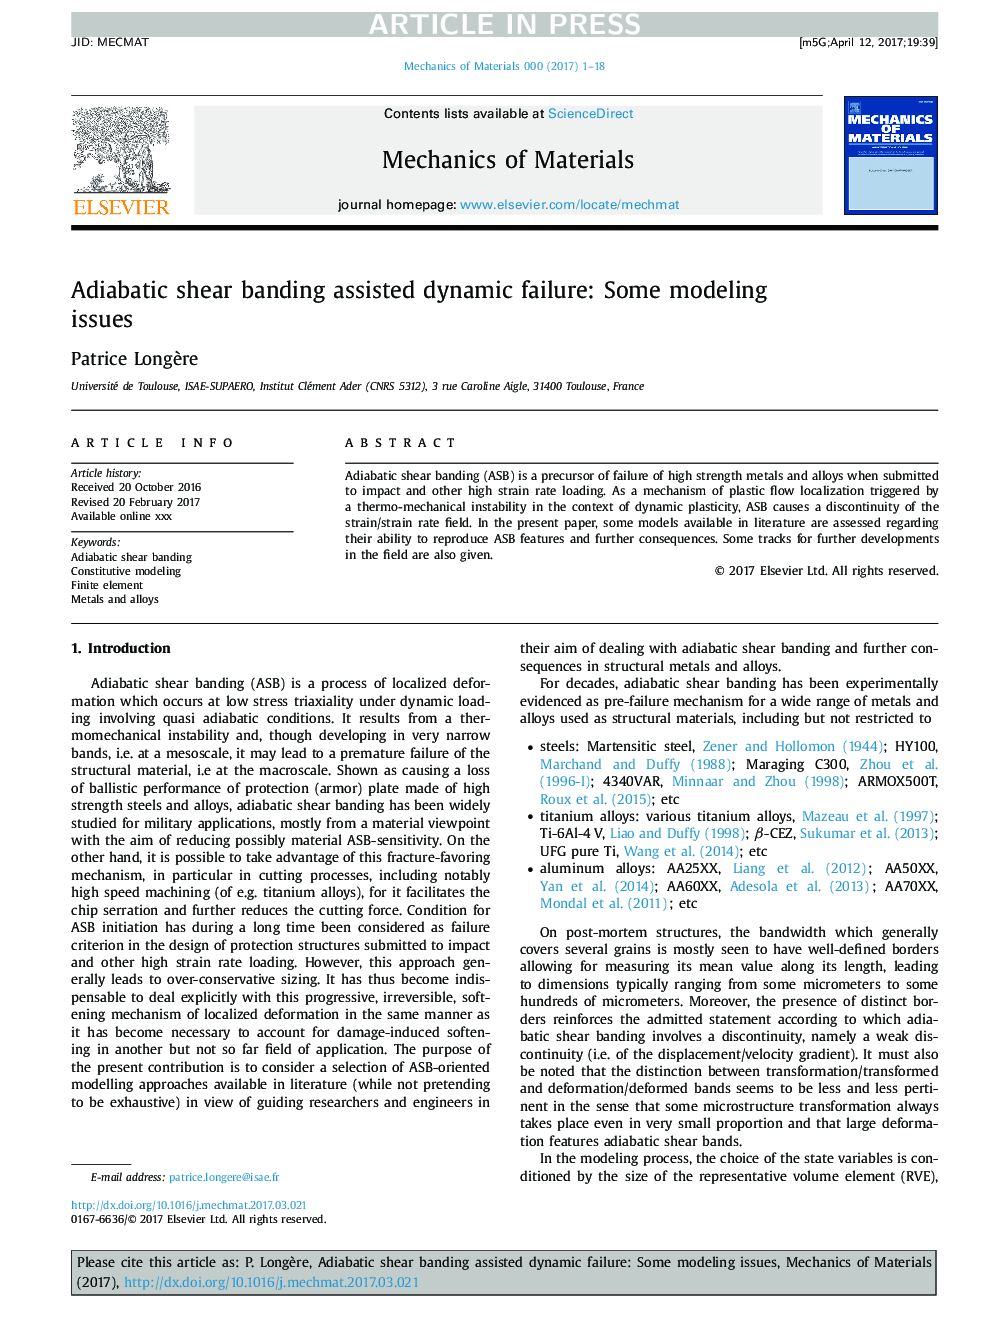 Adiabatic shear banding assisted dynamic failure: Some modeling issues